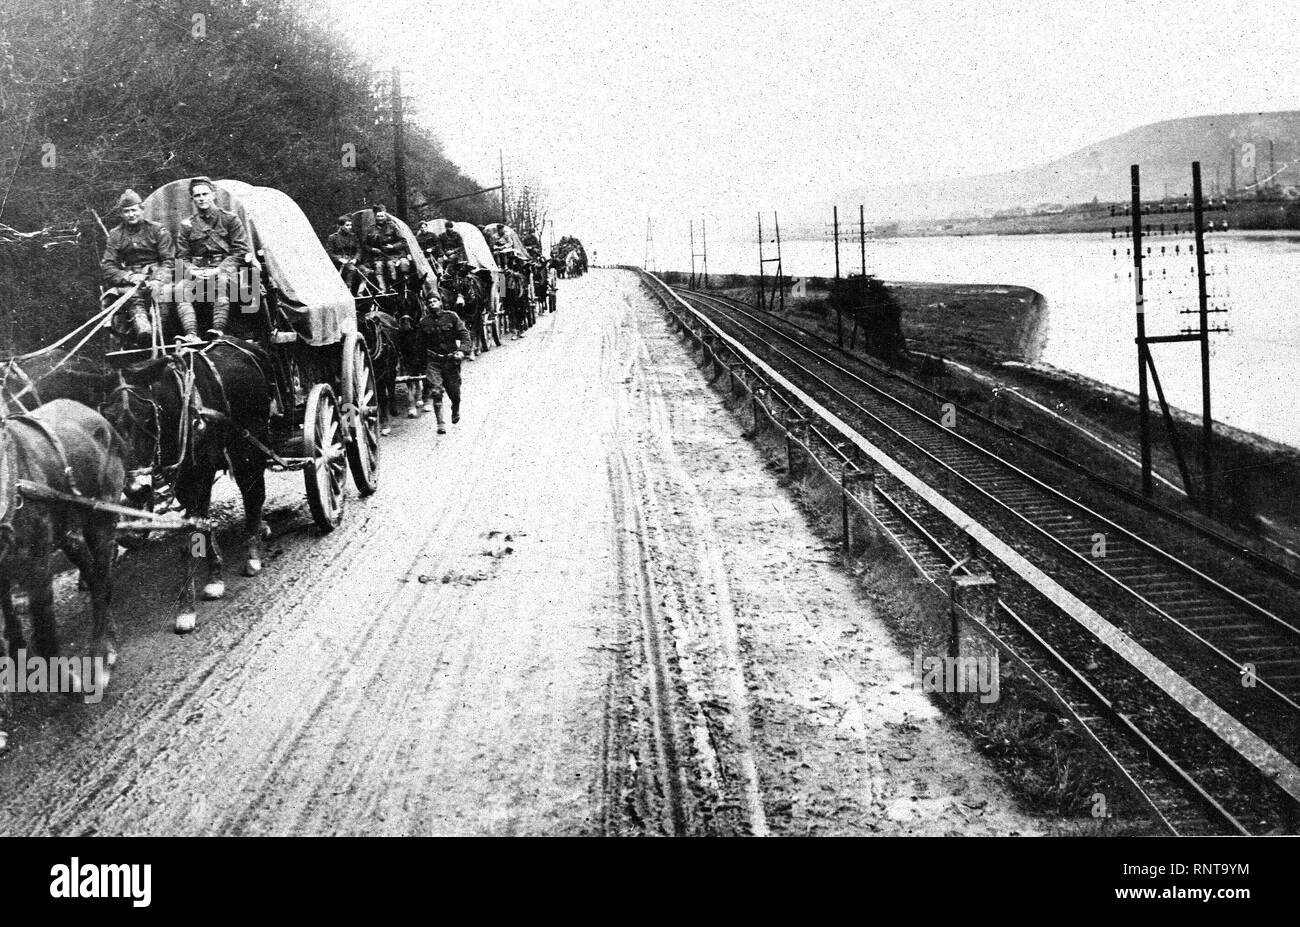 January 1919 - Army of Occupation - American Army crossing Rhine River, Germany. Army Trucks on road between Coblenz and Bonn on the left bank of the Rhine river Stock Photo